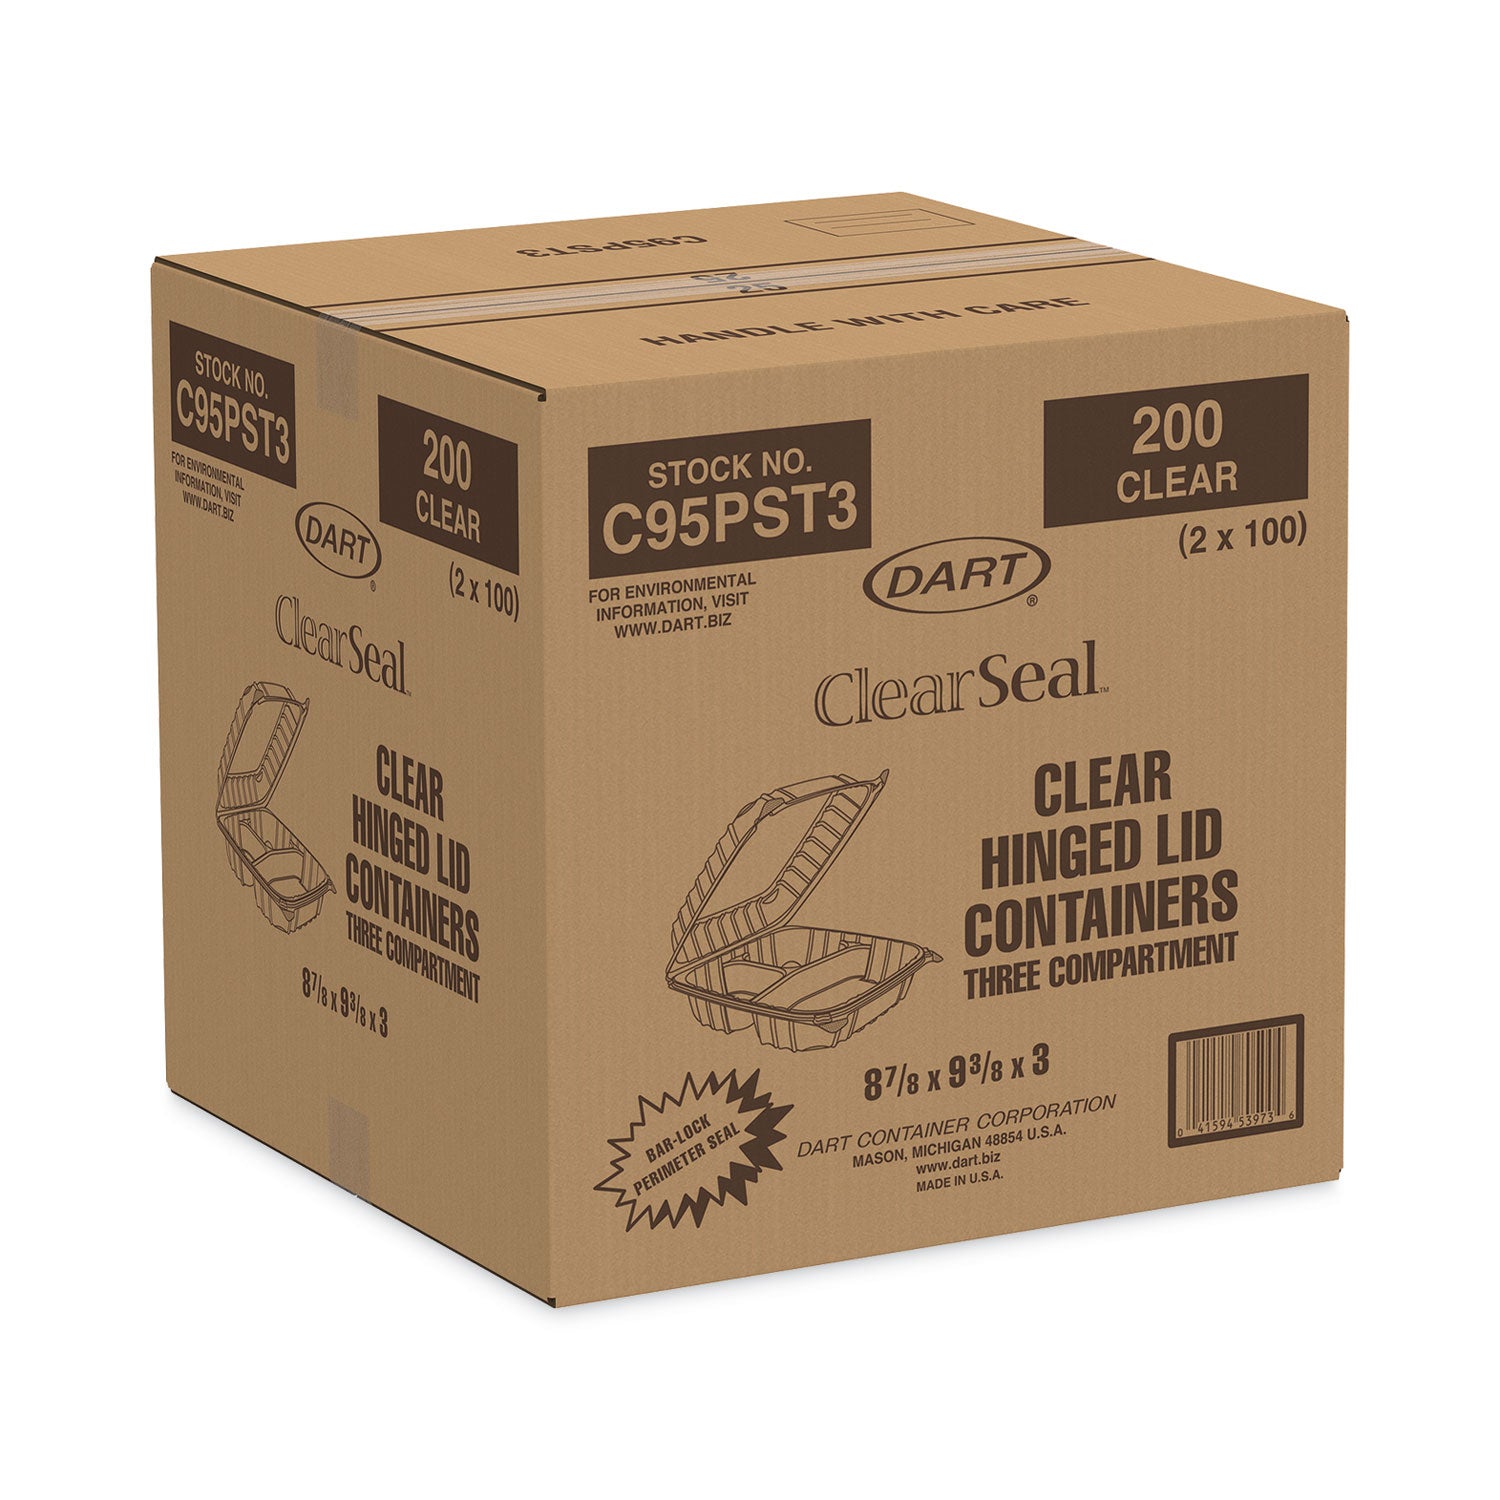 clearseal-hinged-lid-plastic-containers-3-compartment-94-x-89-x-3-plastic-100-bag-2-bags-carton_dccc95pst3 - 2